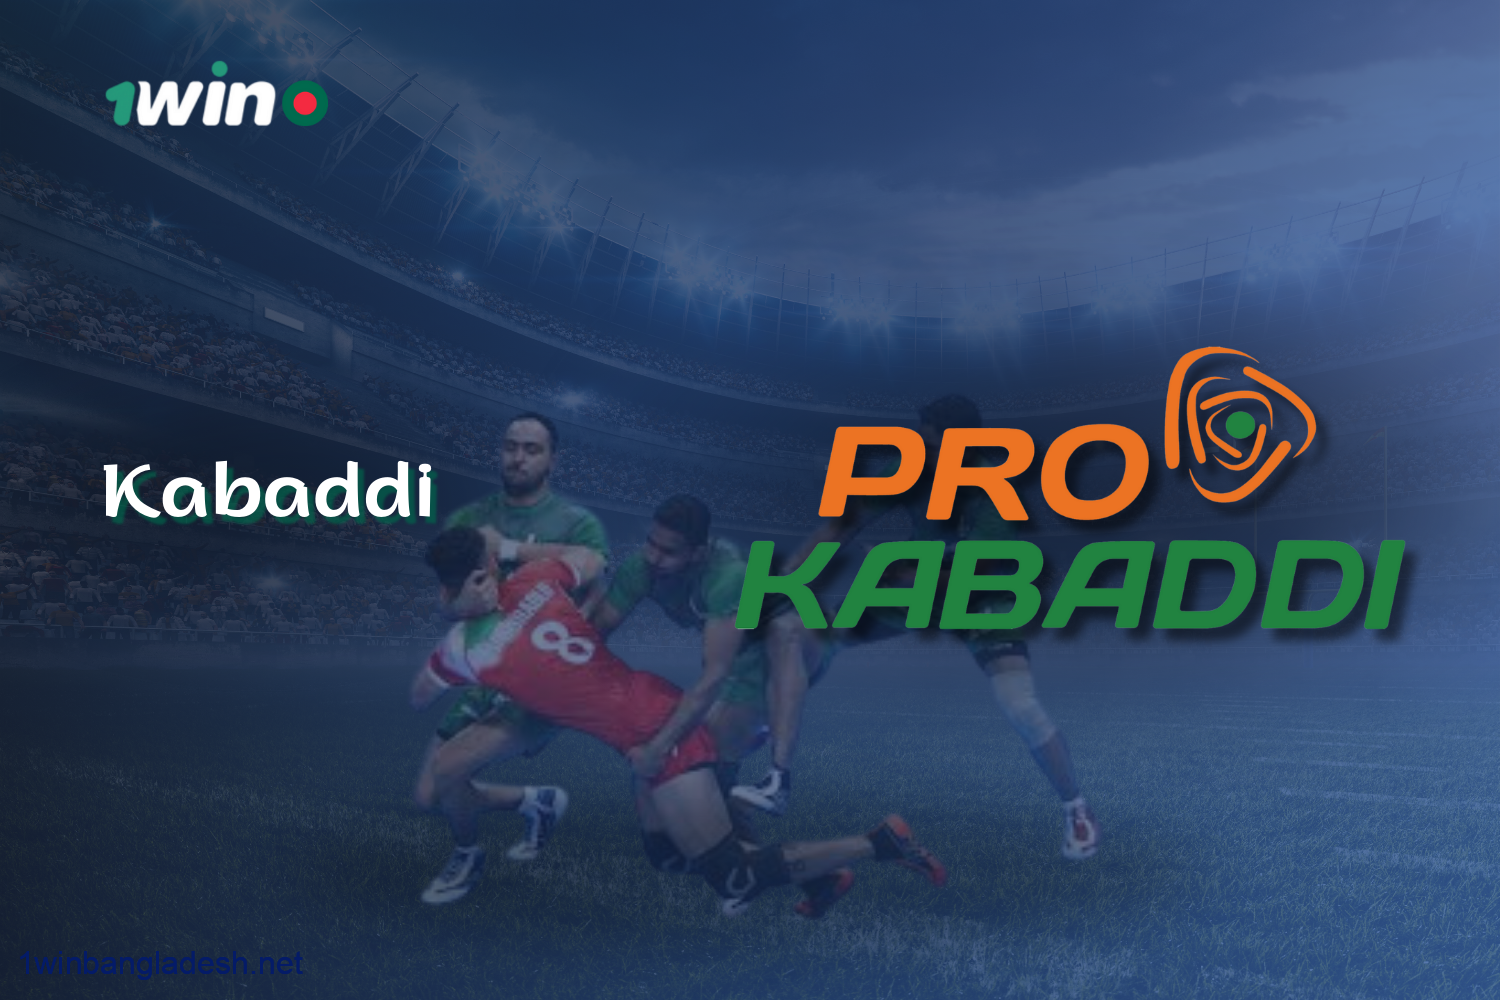 1win offers players from Bangladesh to bet on Kabaddi in the Sports section